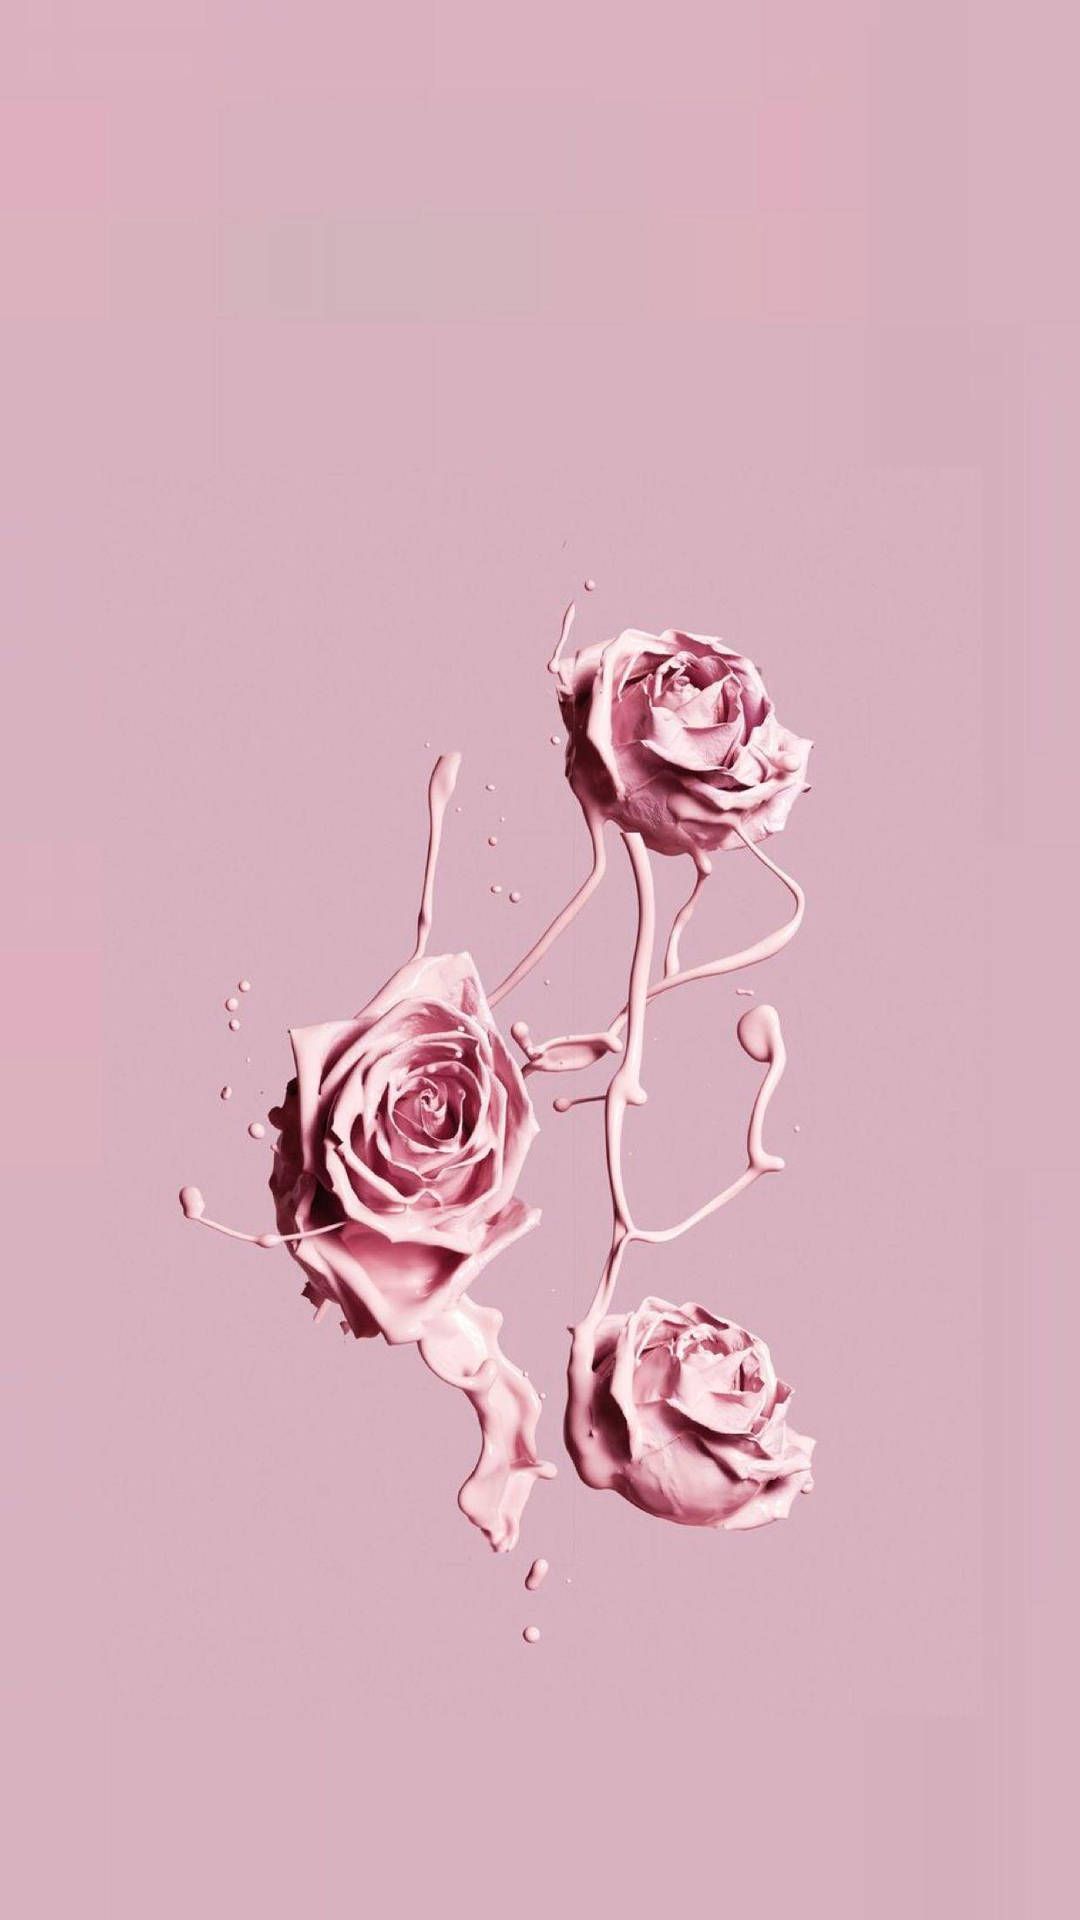 IPhone wallpaper with beautiful flowers, pink roses, and a splash of watercolor paint. - Pink